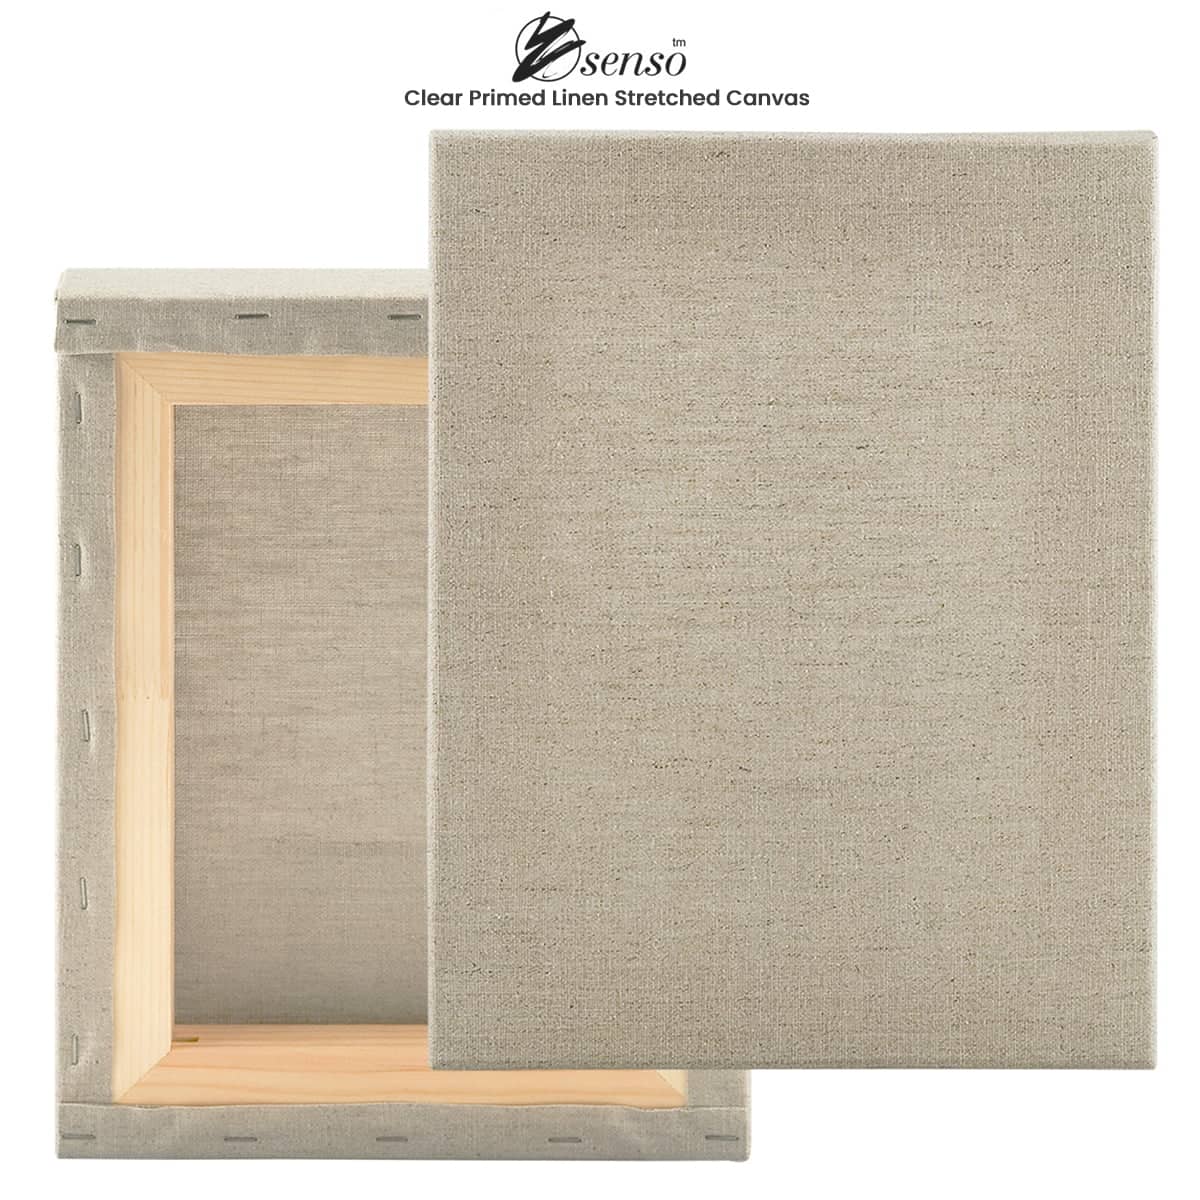 Senso Clear Primed Linen Stretched Canvas 1-1/2 Deep - Box of 3